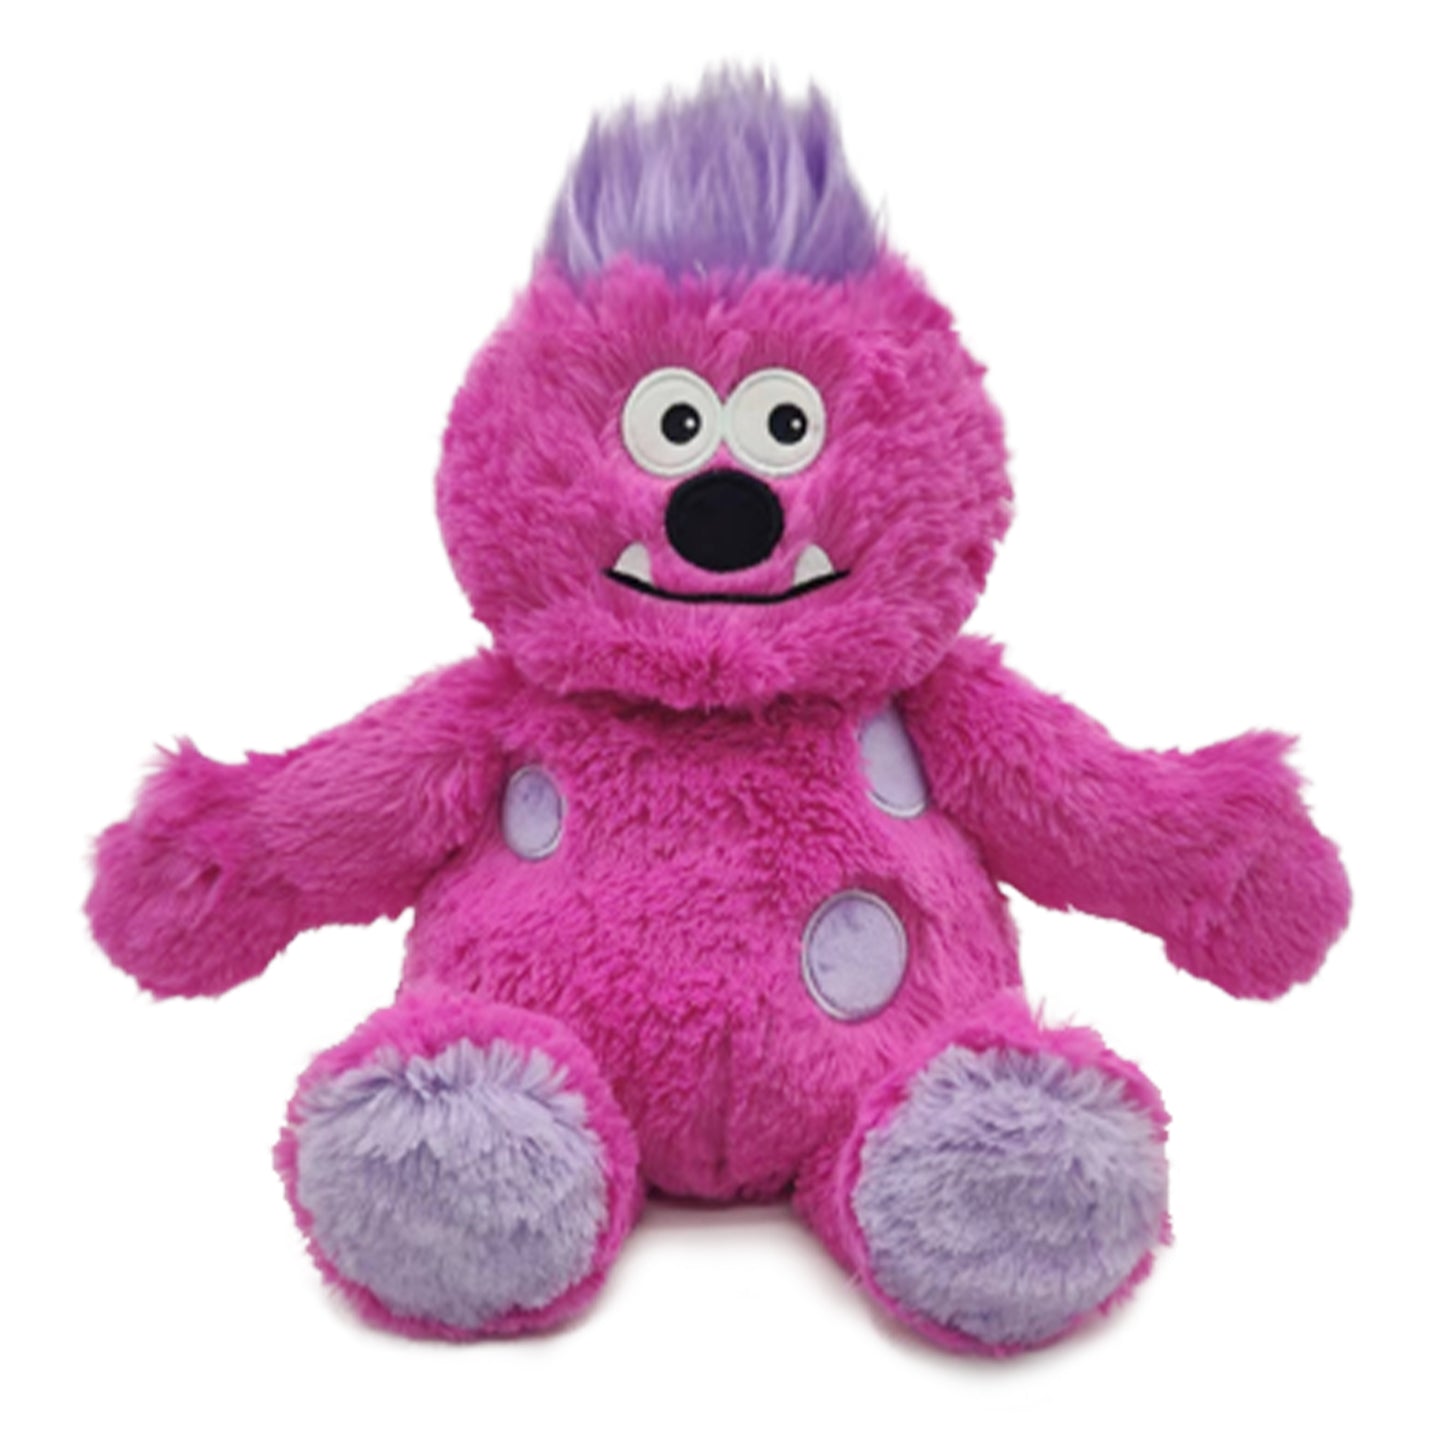 PINK MONSTER - Warmies Cozy Plush Heatable Lavender Scented Stuffed Animal